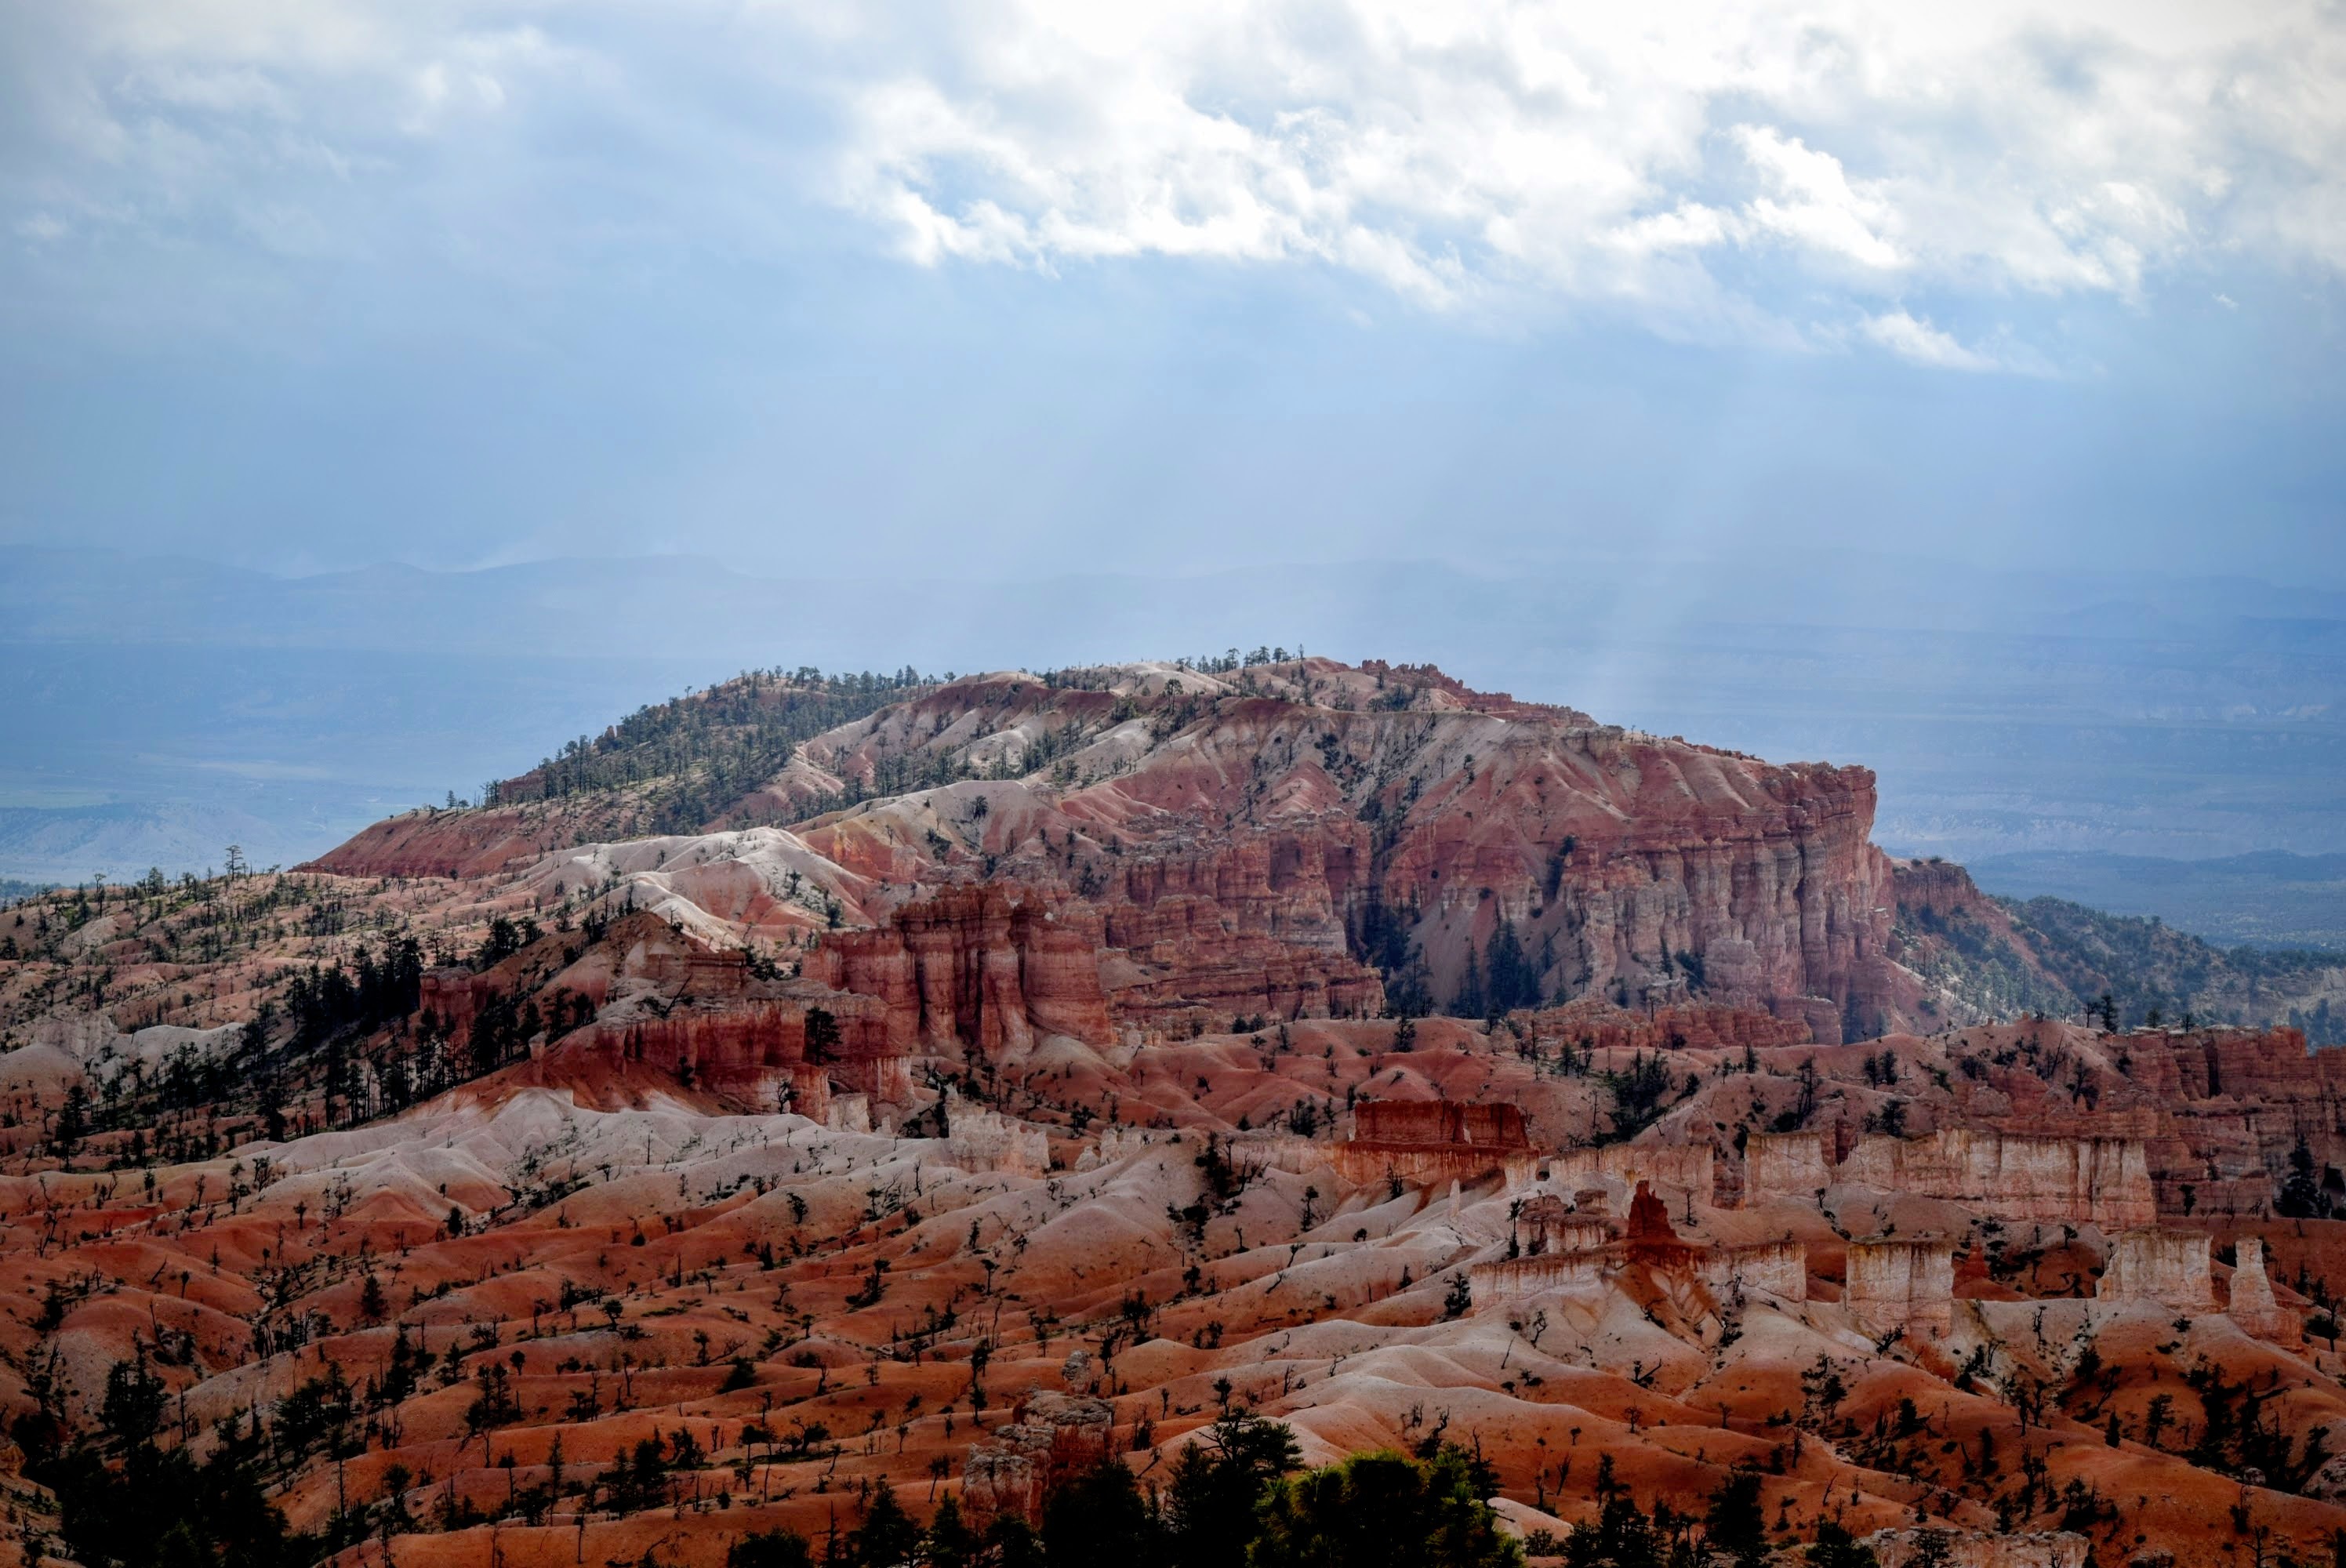 The Beautiful Rock Formations Of Bryce Canyon National Park by driveawaybob